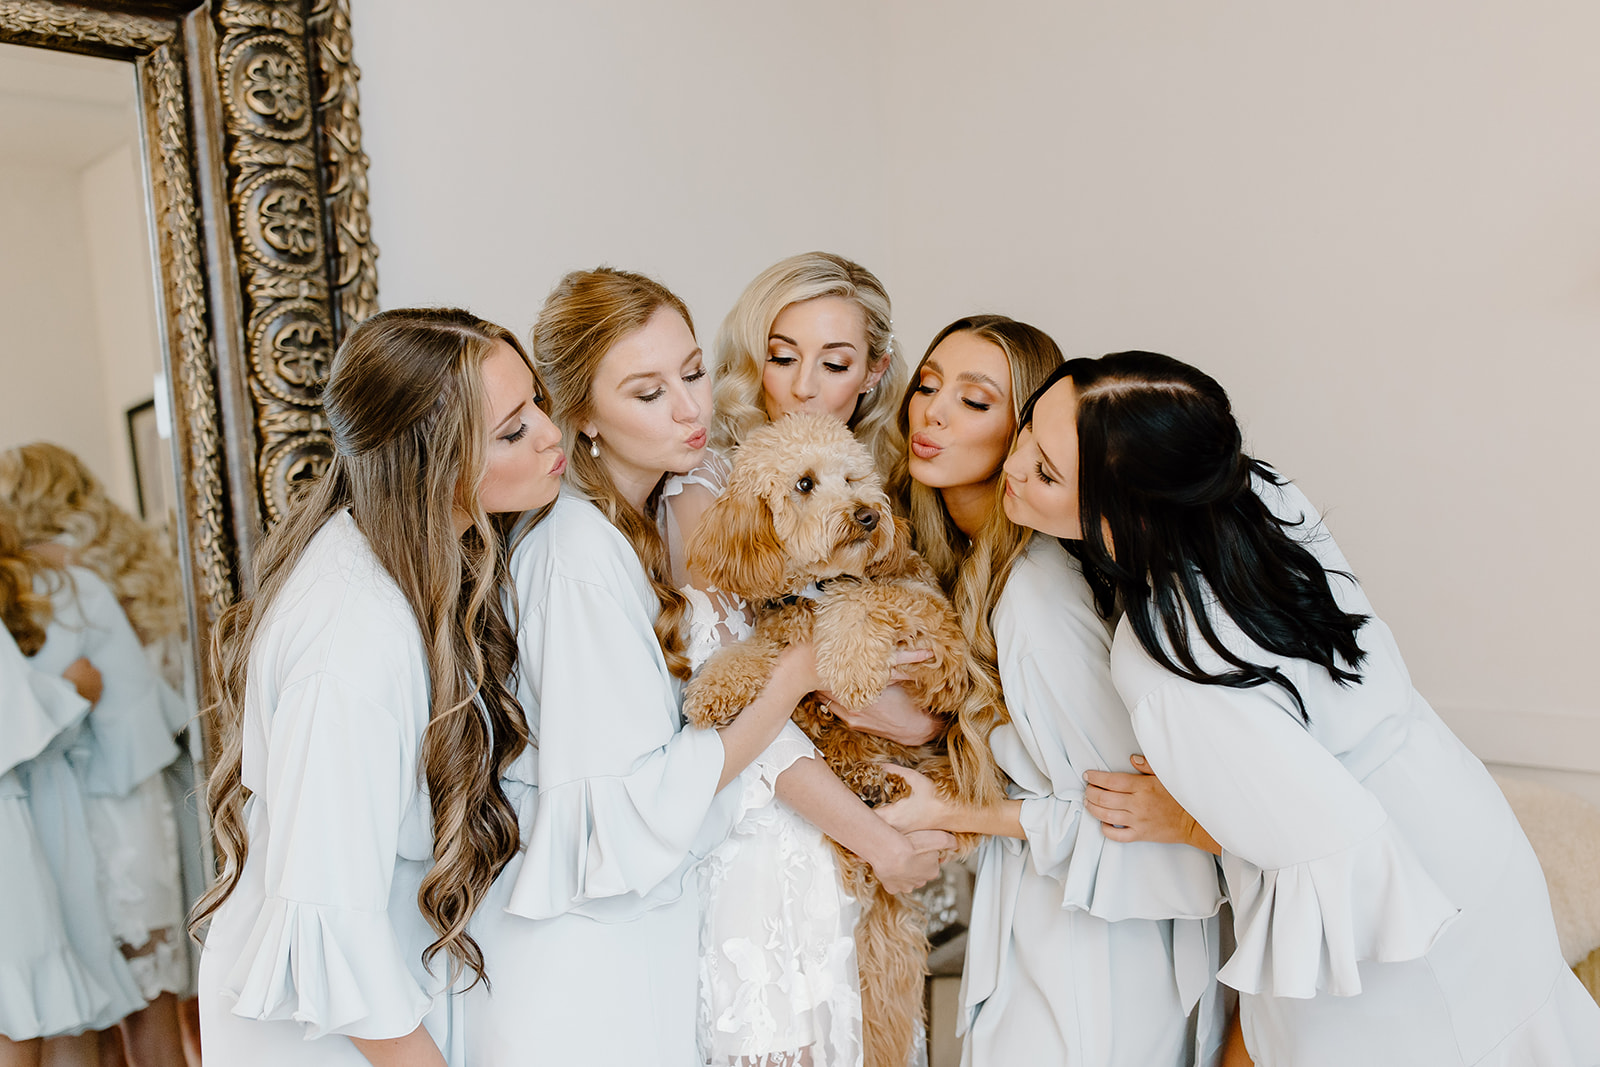 The bride and her bridesmaids kiss her mini golden doodle.